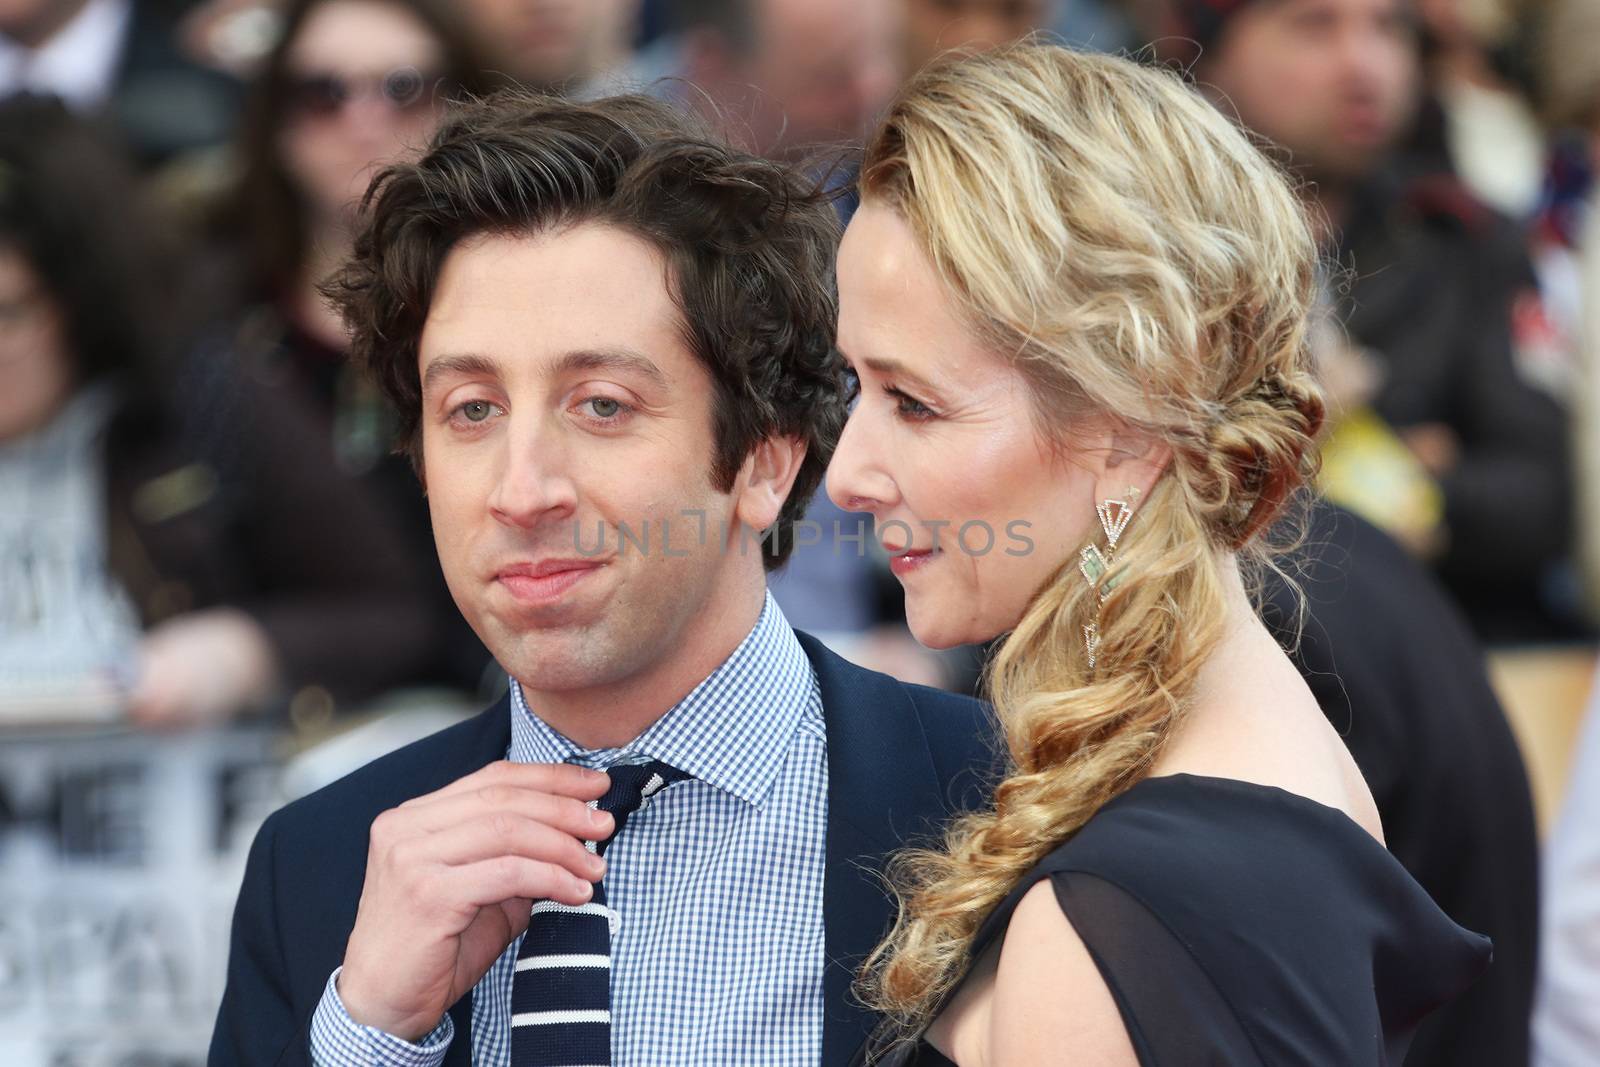 ENGLAND, London: Simon Helberg attends the Florence Foster Jenkins premiere, on April 12, 2016, at the Odeon Leicester Square.The film stars Meryl Streep, who plays Florence Foster Jenkins, Hugh Grant, and Simon Helberg. It is based on the real life story of an heiress who wanted to become an opera singer,despite having a horrible voice. 